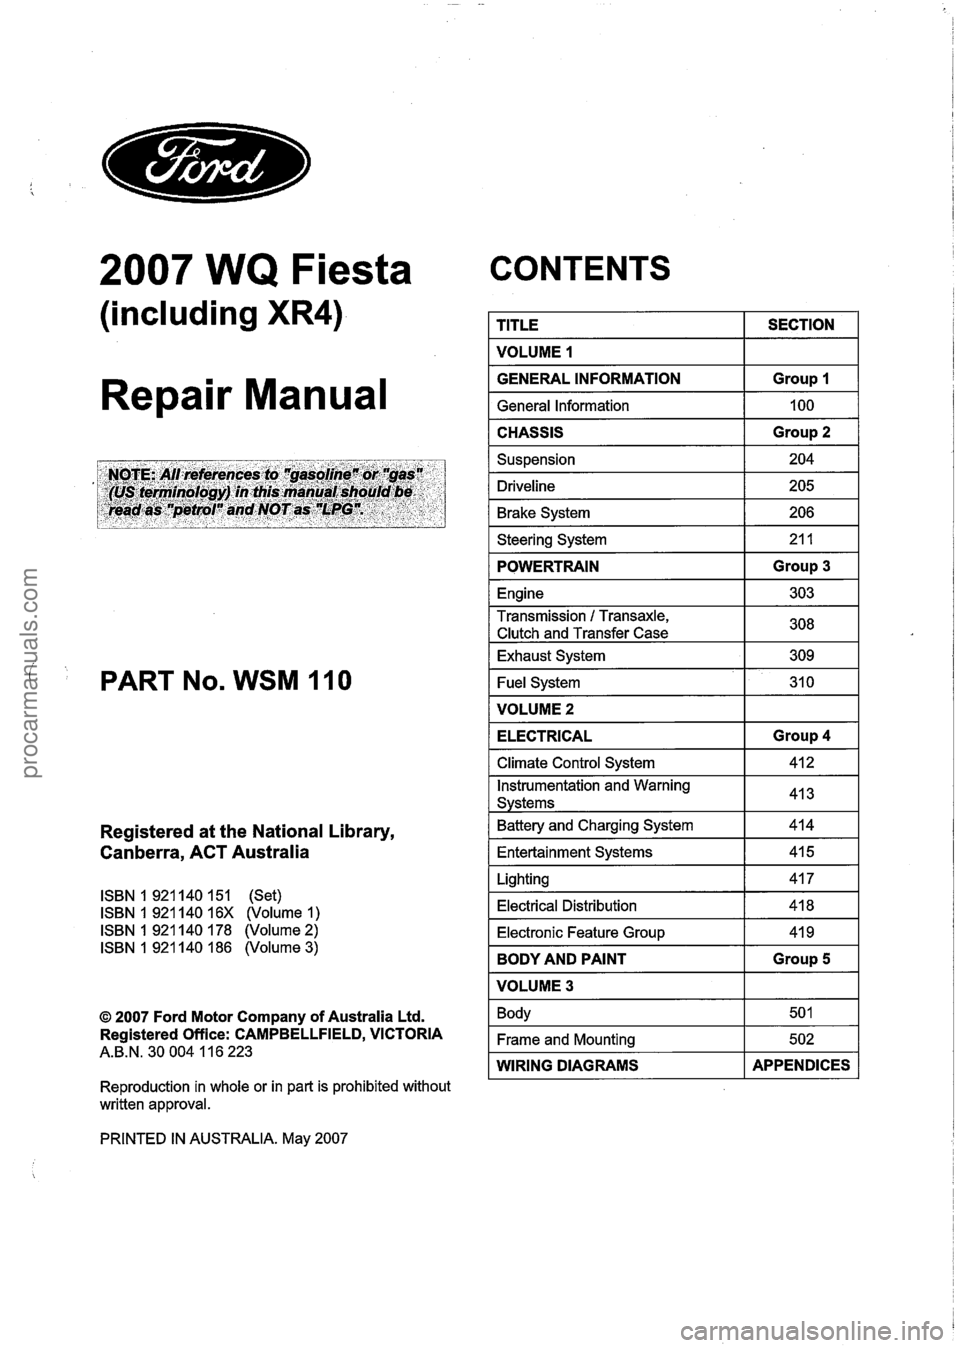 FORD FIESTA 2007  Workshop Manual 
2007 WQ Fiesta 
(including XR4) 
Repair Manual 
Registered at  the  National Library, 
Canberra,  ACT Australia 
ISBN 1 921  140 151 (Set) 
ISBN 1 921  140 16X (Volume 1 ) 
ISBN 1 921  140 178 (Volum